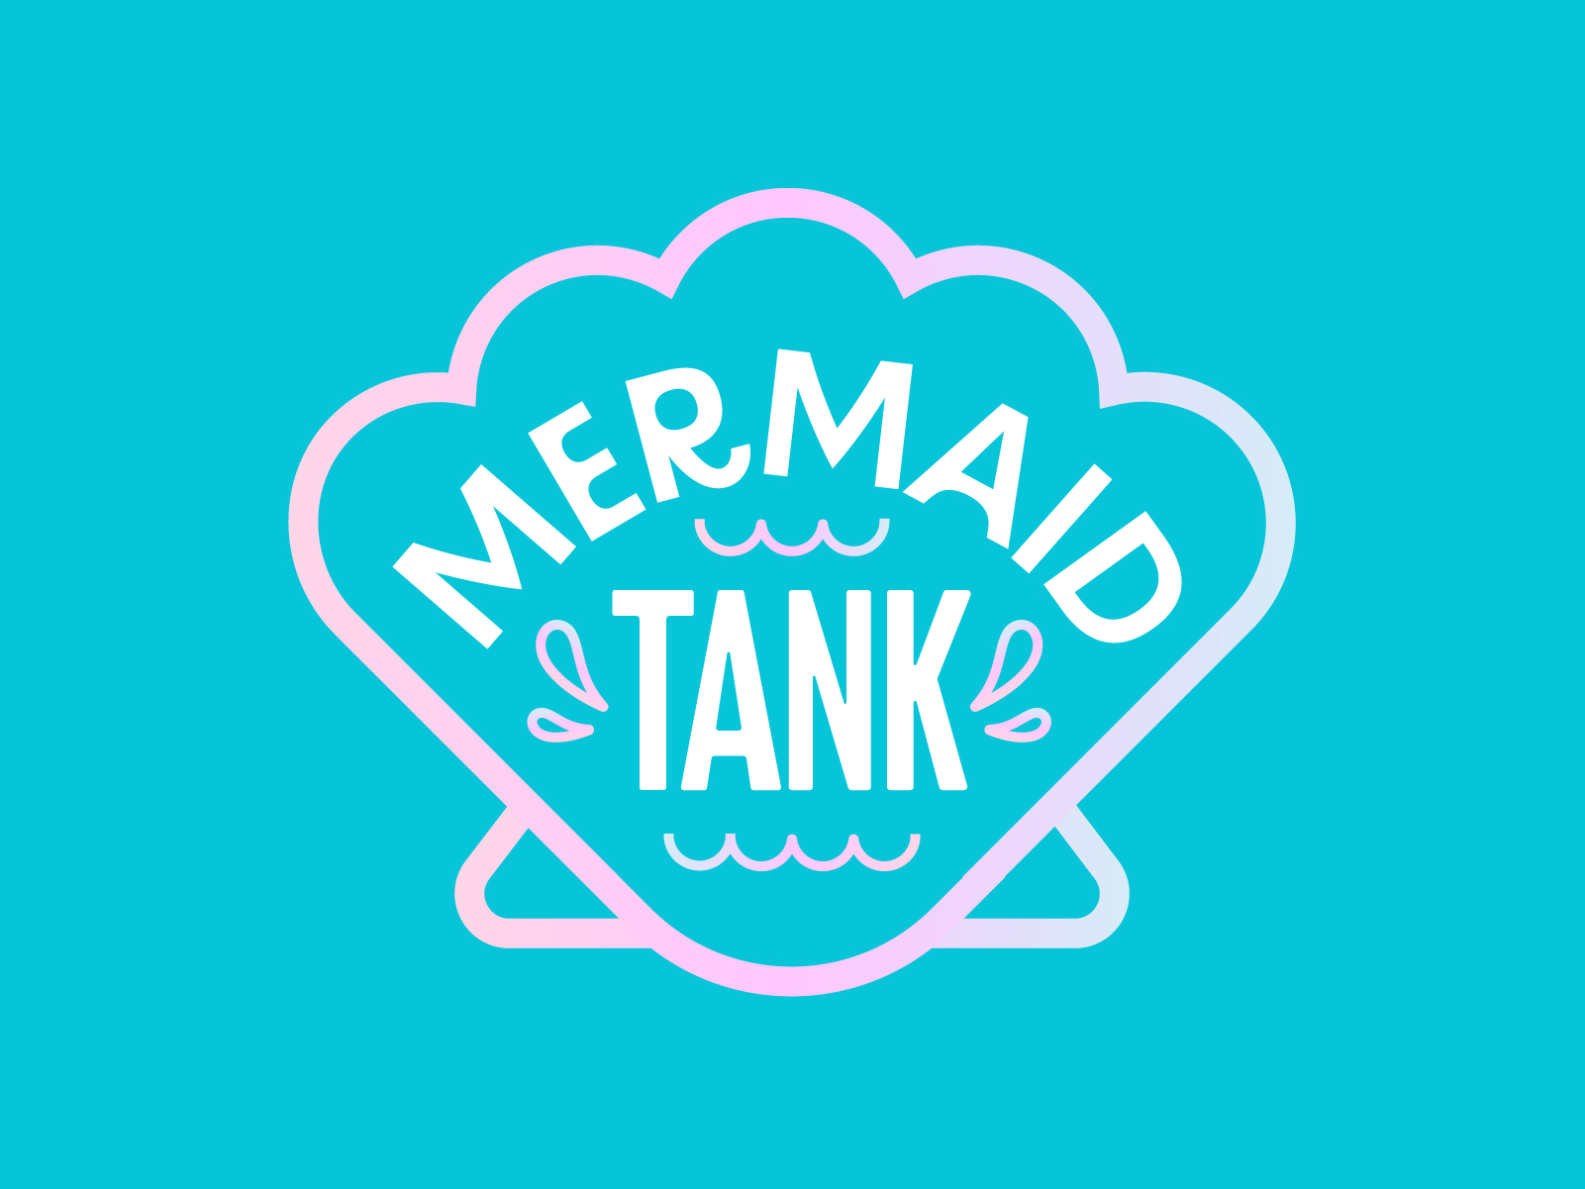 Mermaid Tank 2 by Libby Inlow on Dribbble